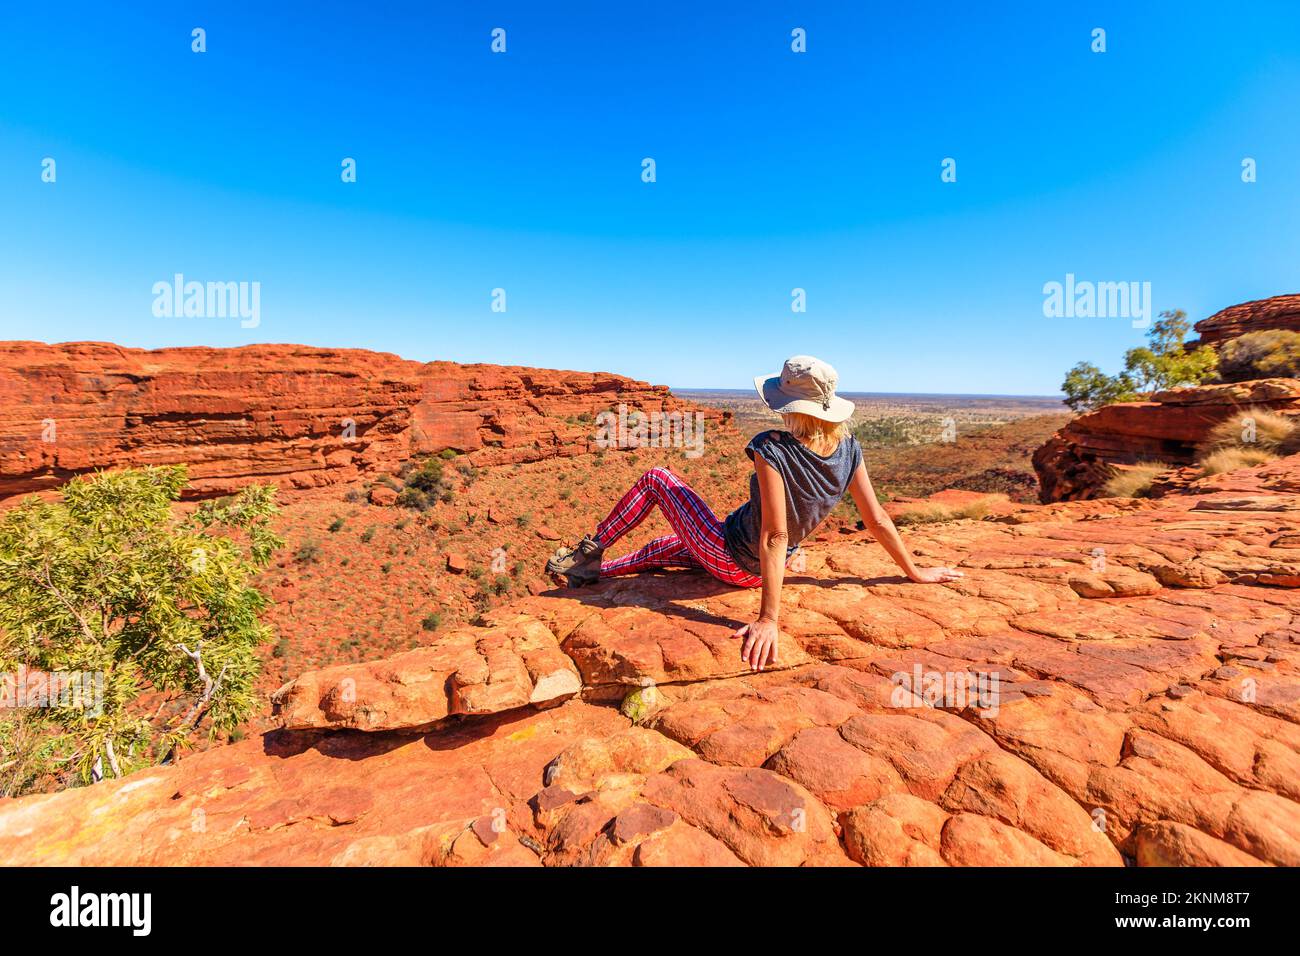 Watarrka Nationalpark, Northern Territory NT, Australien. Tourist Frau mit Hut, Blick Panoramablick auf Kings Canyon im Red Centre Outback. Stockfoto